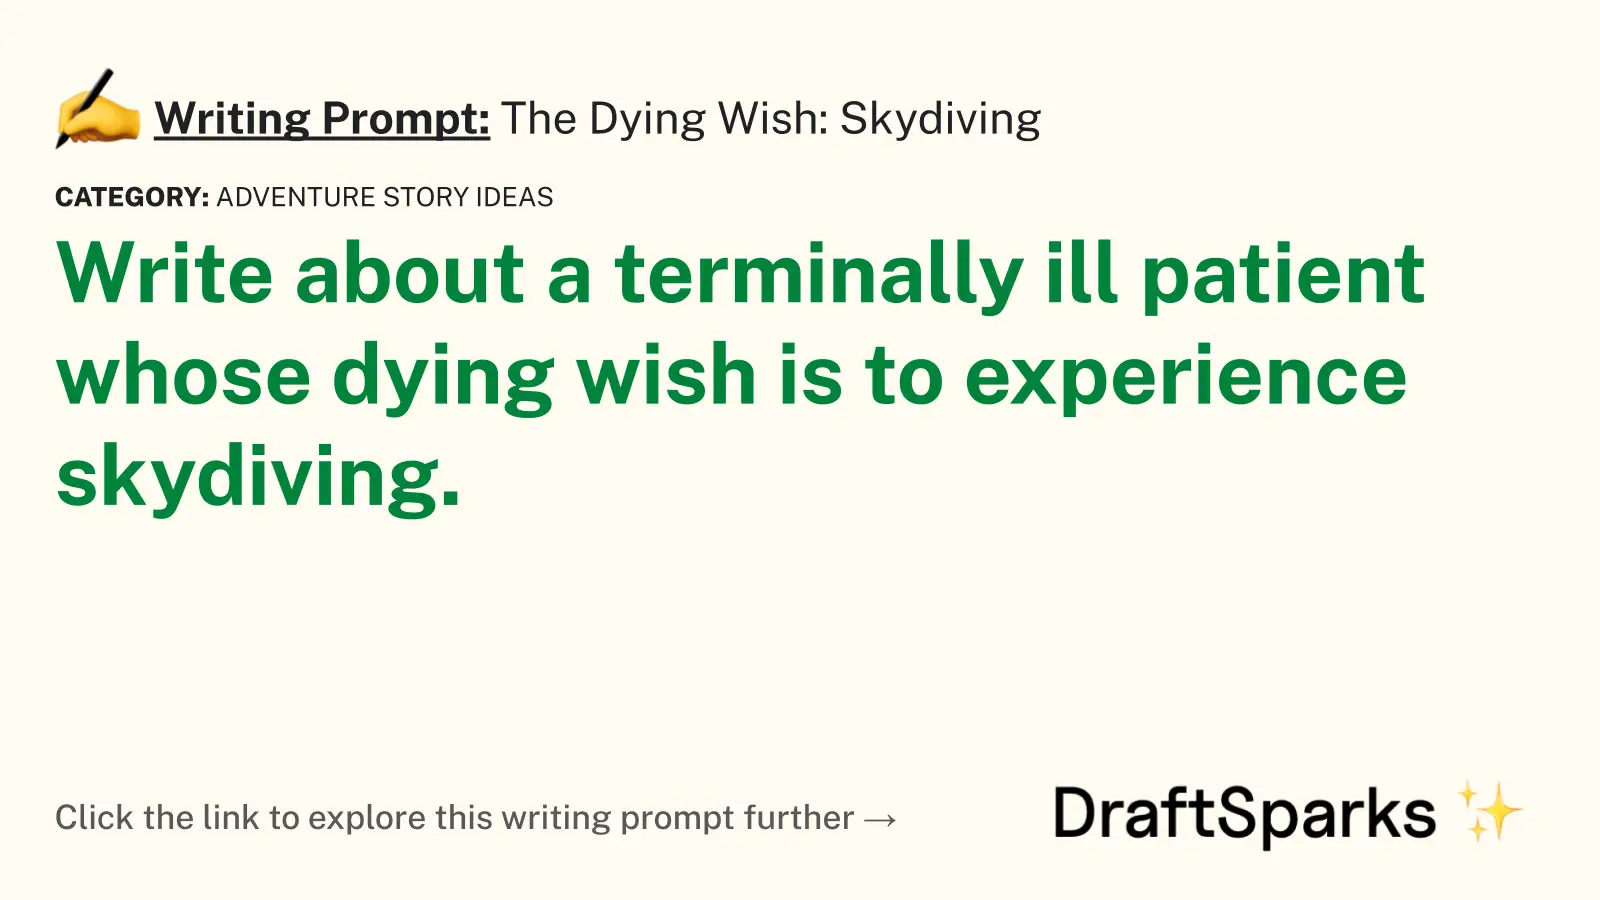 The Dying Wish: Skydiving